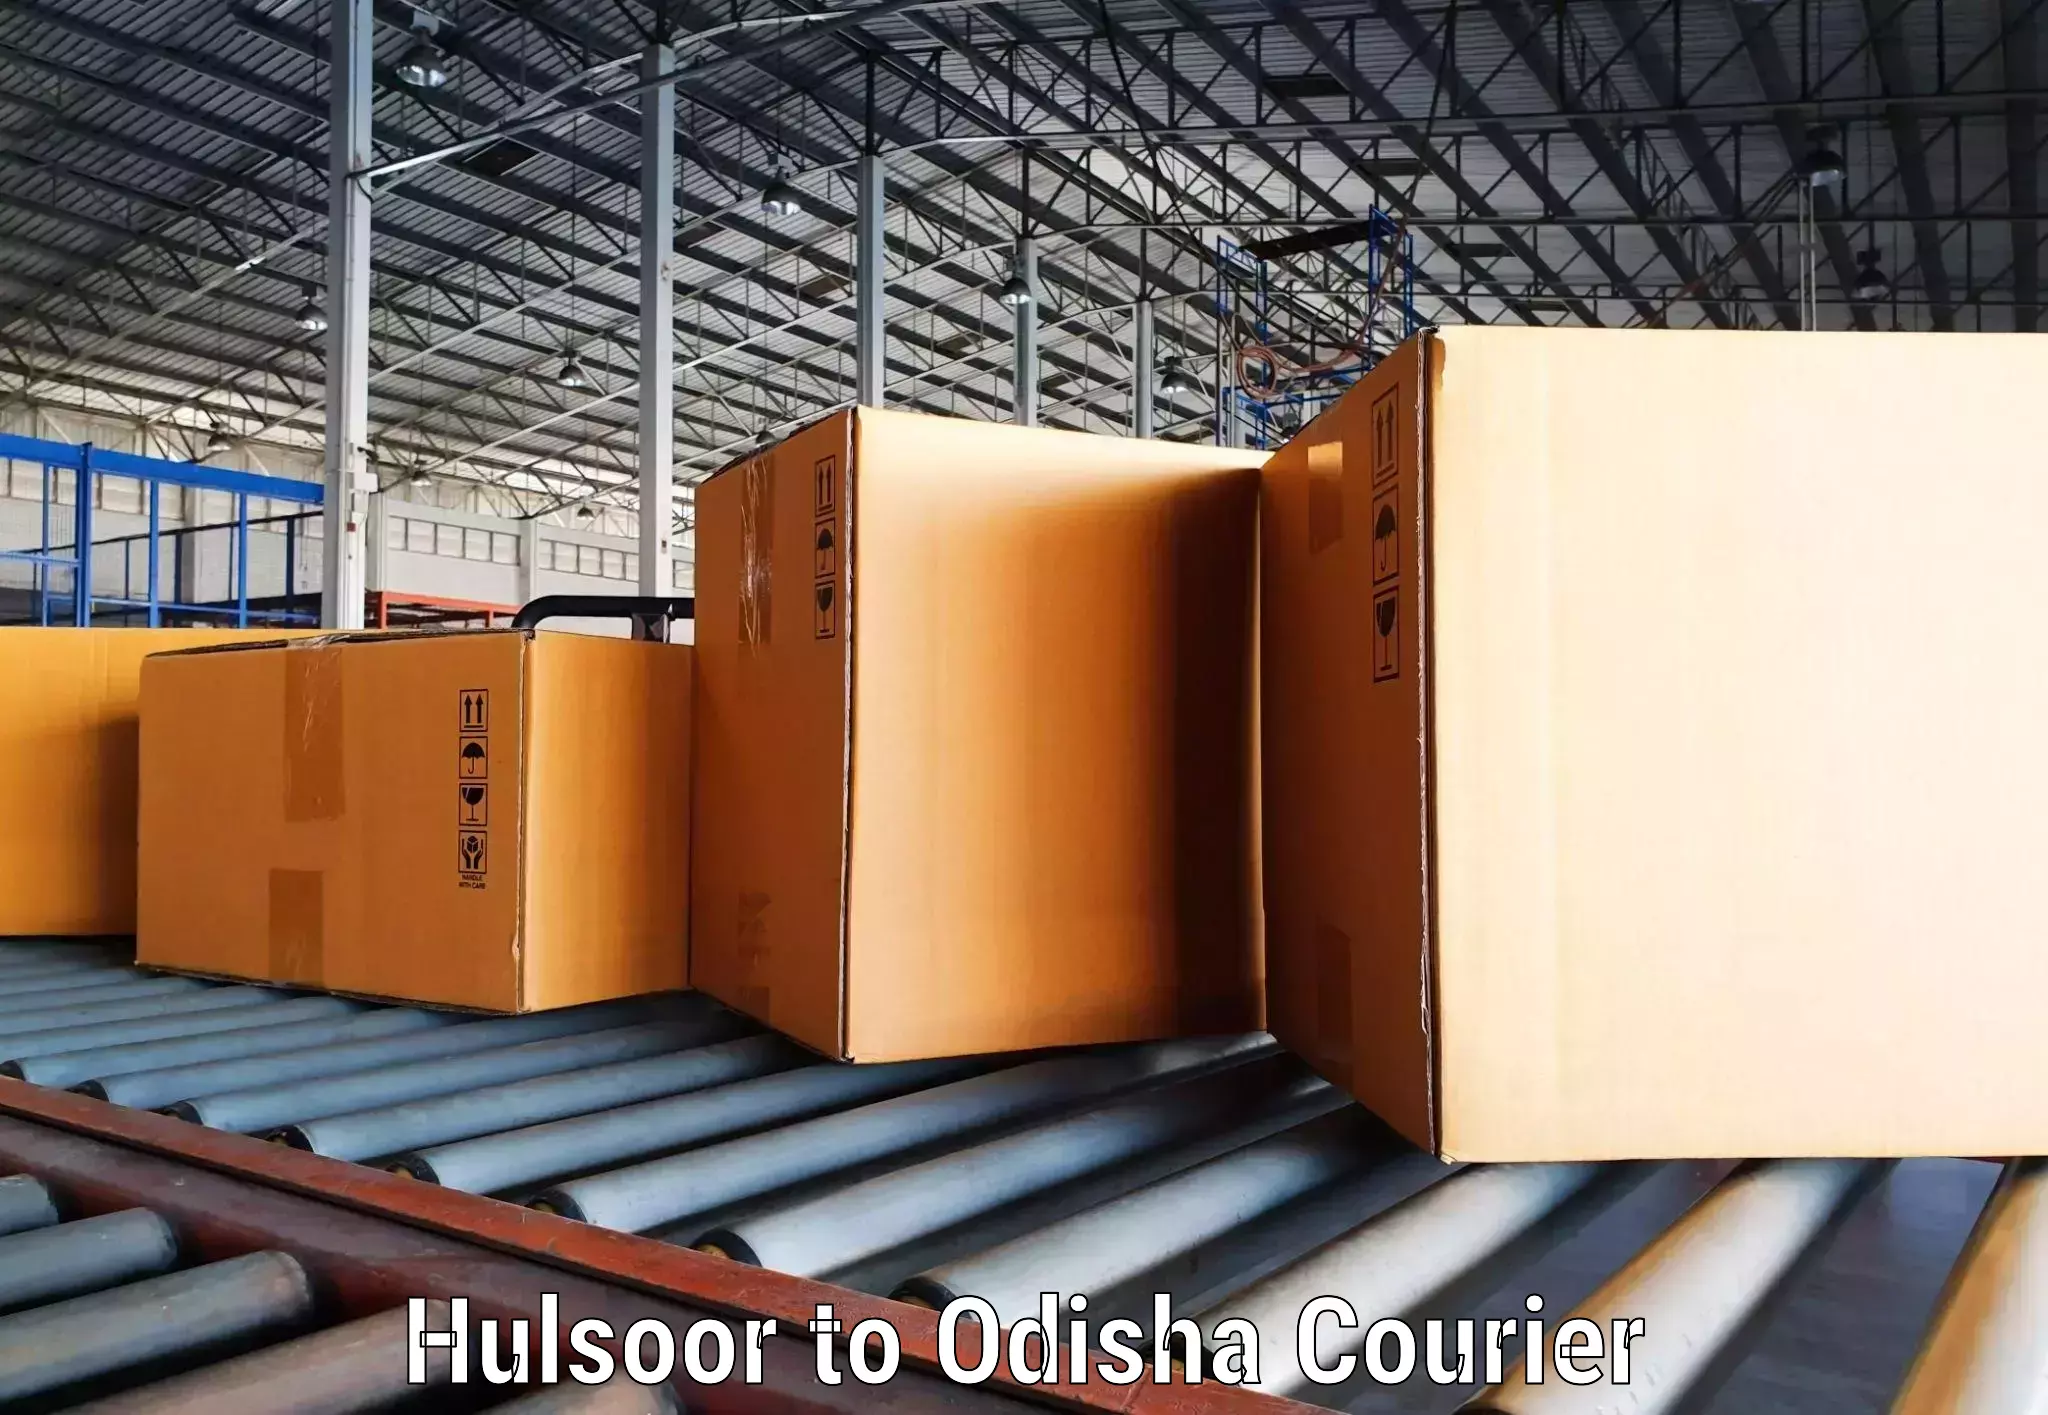 Advanced tracking systems in Hulsoor to Riamal